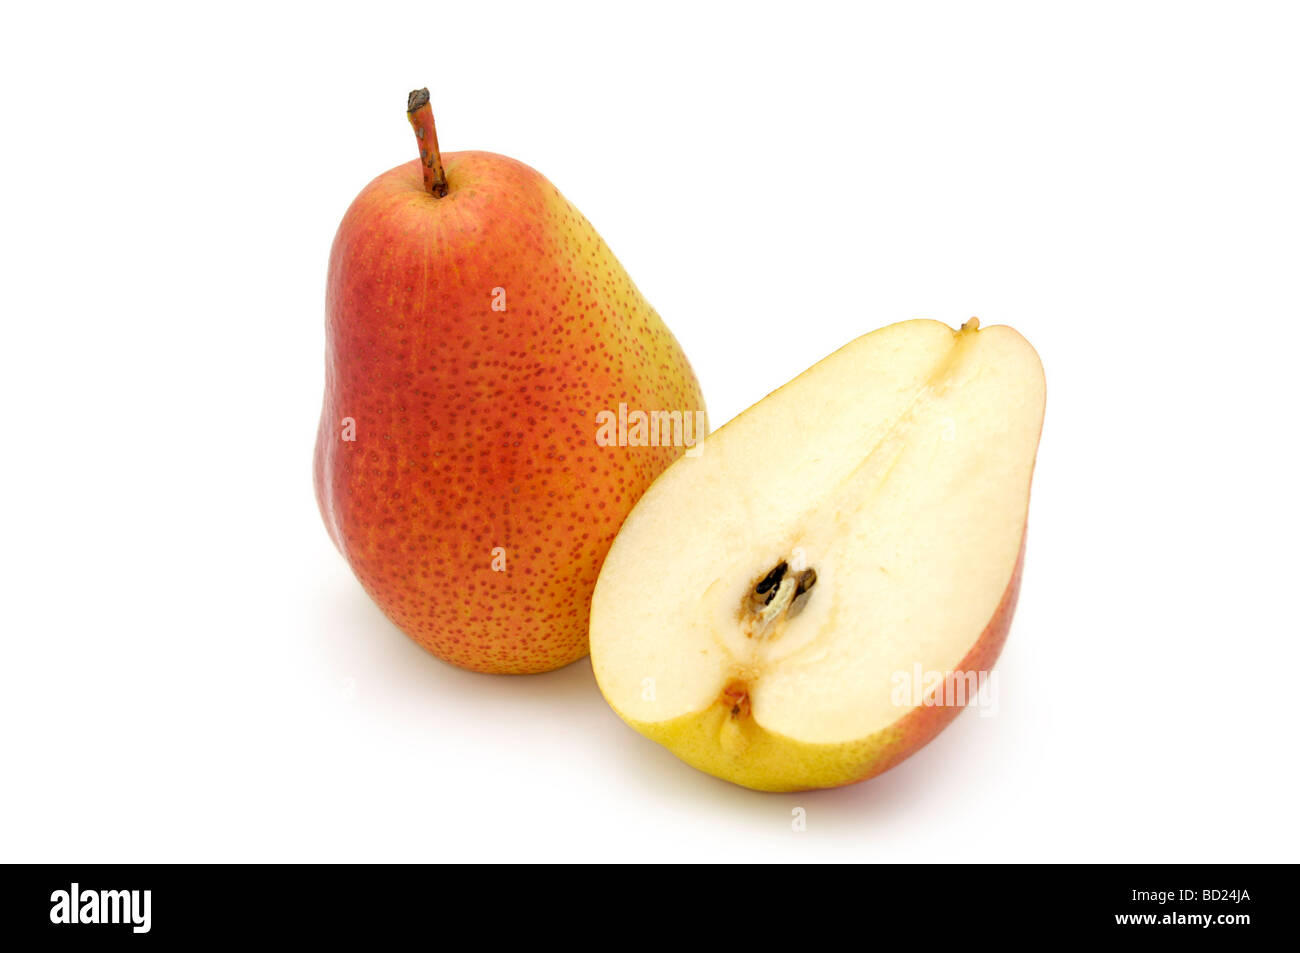 A Whole and Half a Forelle Pear Stock Photo